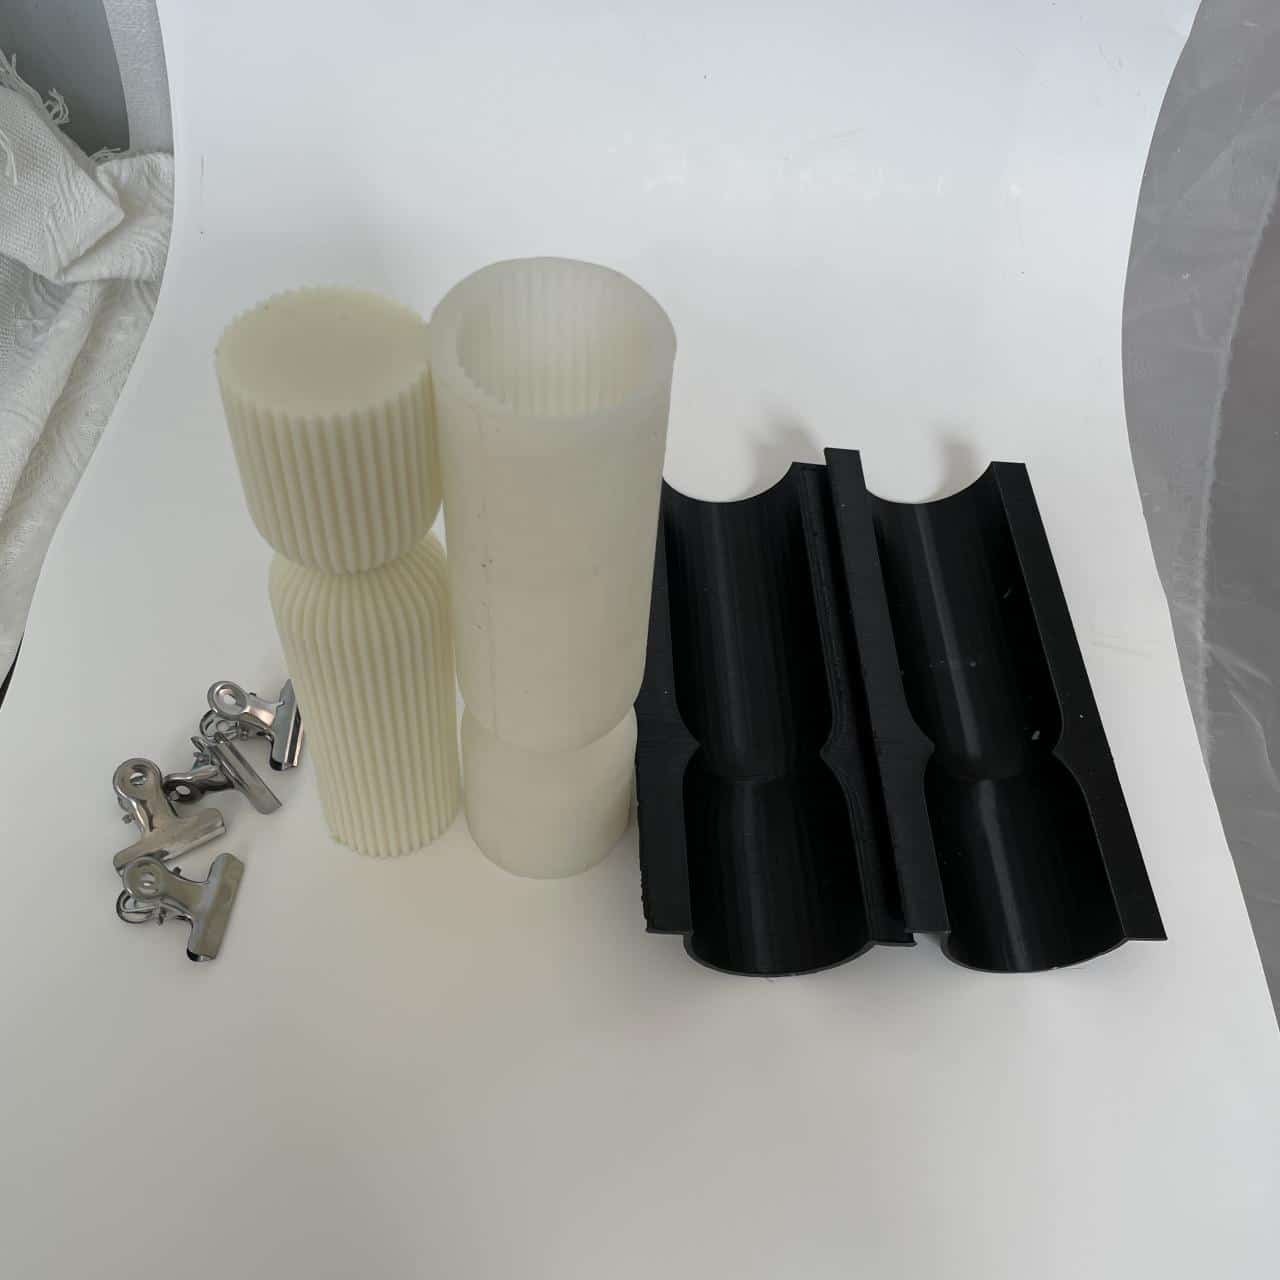 Easy Demolding No Parting Lines Deformation Resistant Ribbed Aesthetic Twist Cylindrical Tall Pillar Candle Molds Combination 6001 -  - 5